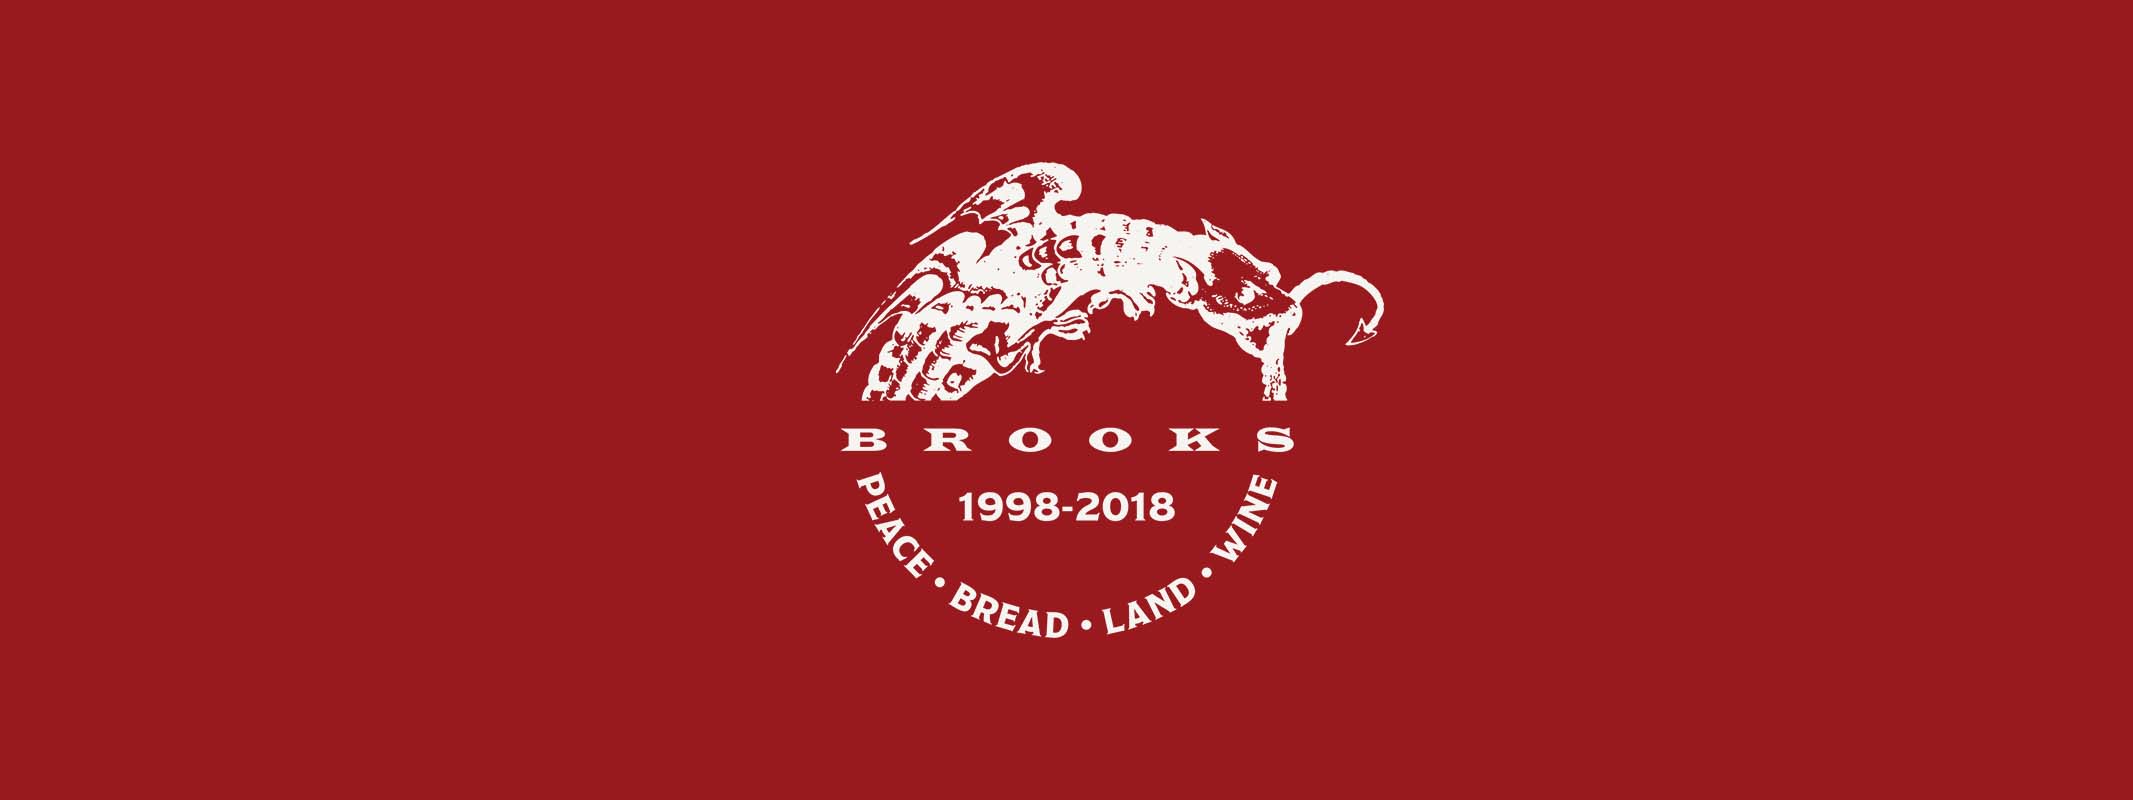 Brooks Wine logo superimposed onto a red background